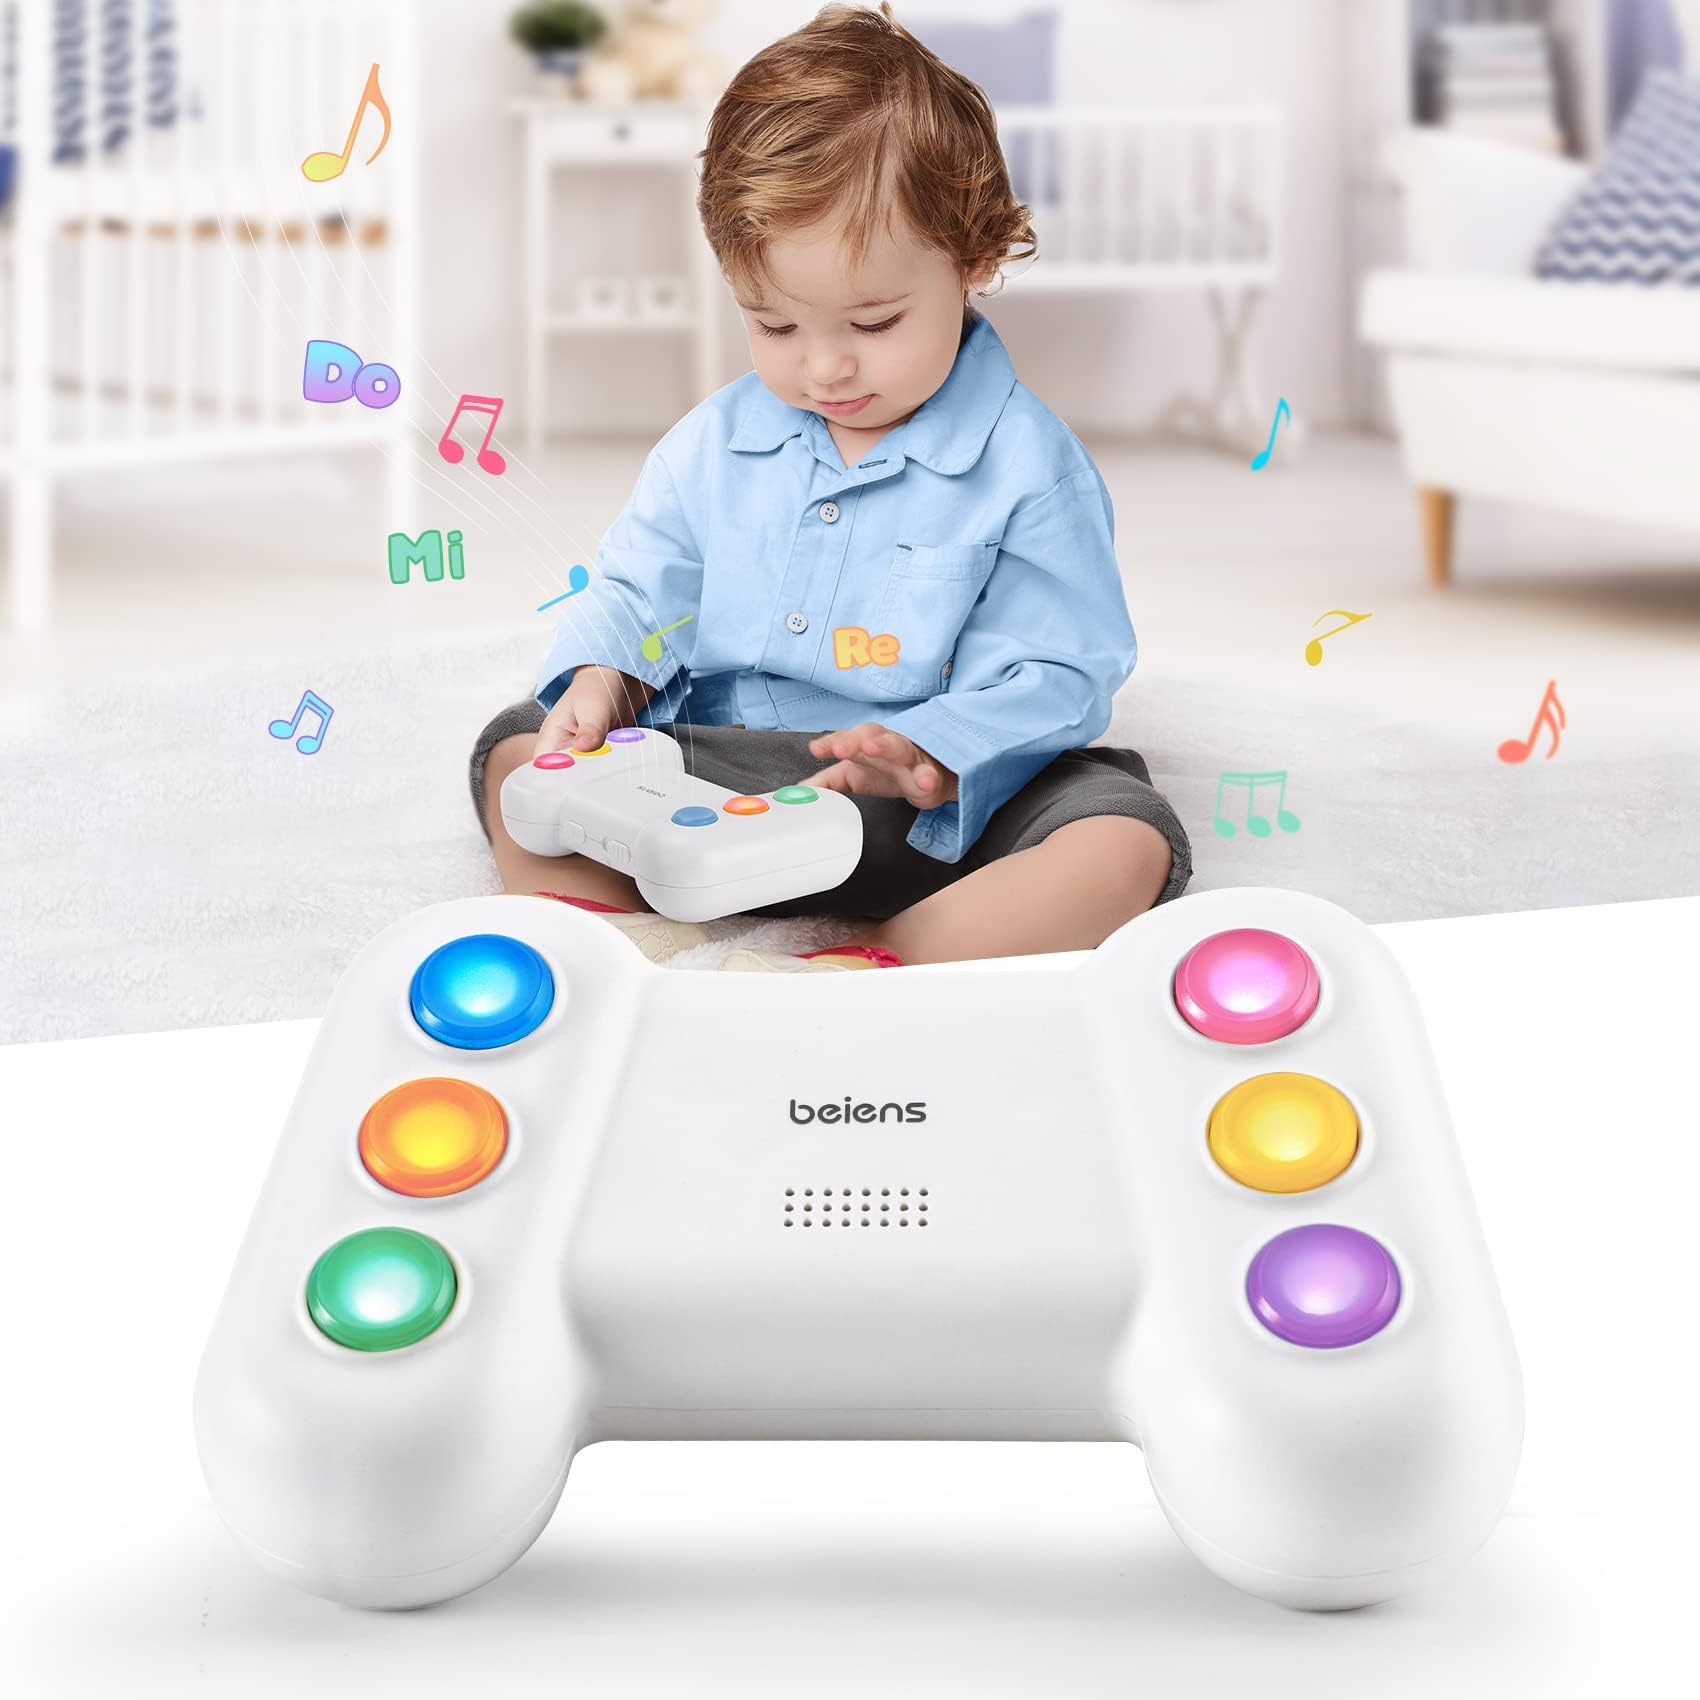 Kids Toys for 2 3 4 5 6 Year Old Boy Girl Sensory Toys Electronic Memory Game with Music and Lights, 4 Modes Simon Game Handheld Travel Toy Christmas Birthday Gift for Toddler Toys Age 2+